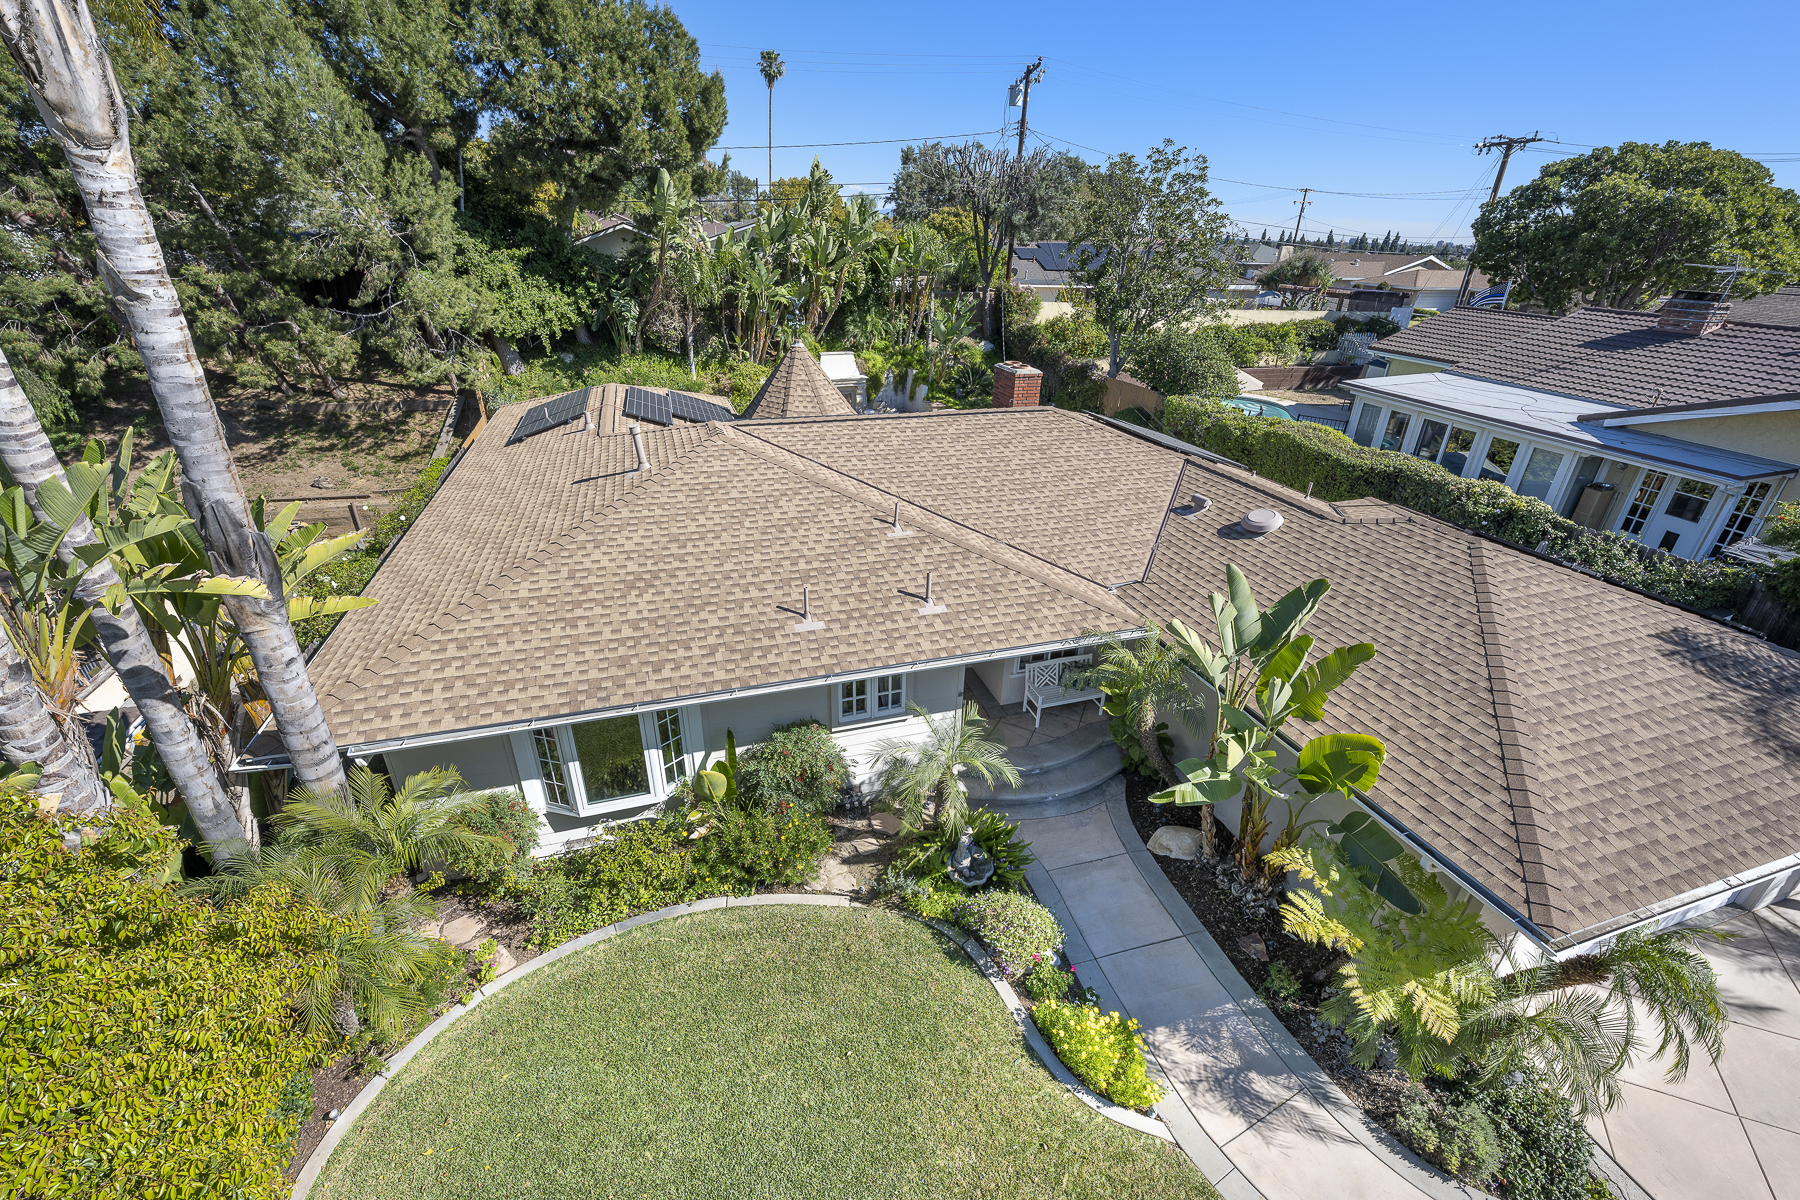 806 N. Adlena Drive, Fullerton, CA 92833: Aerial view of front of house.